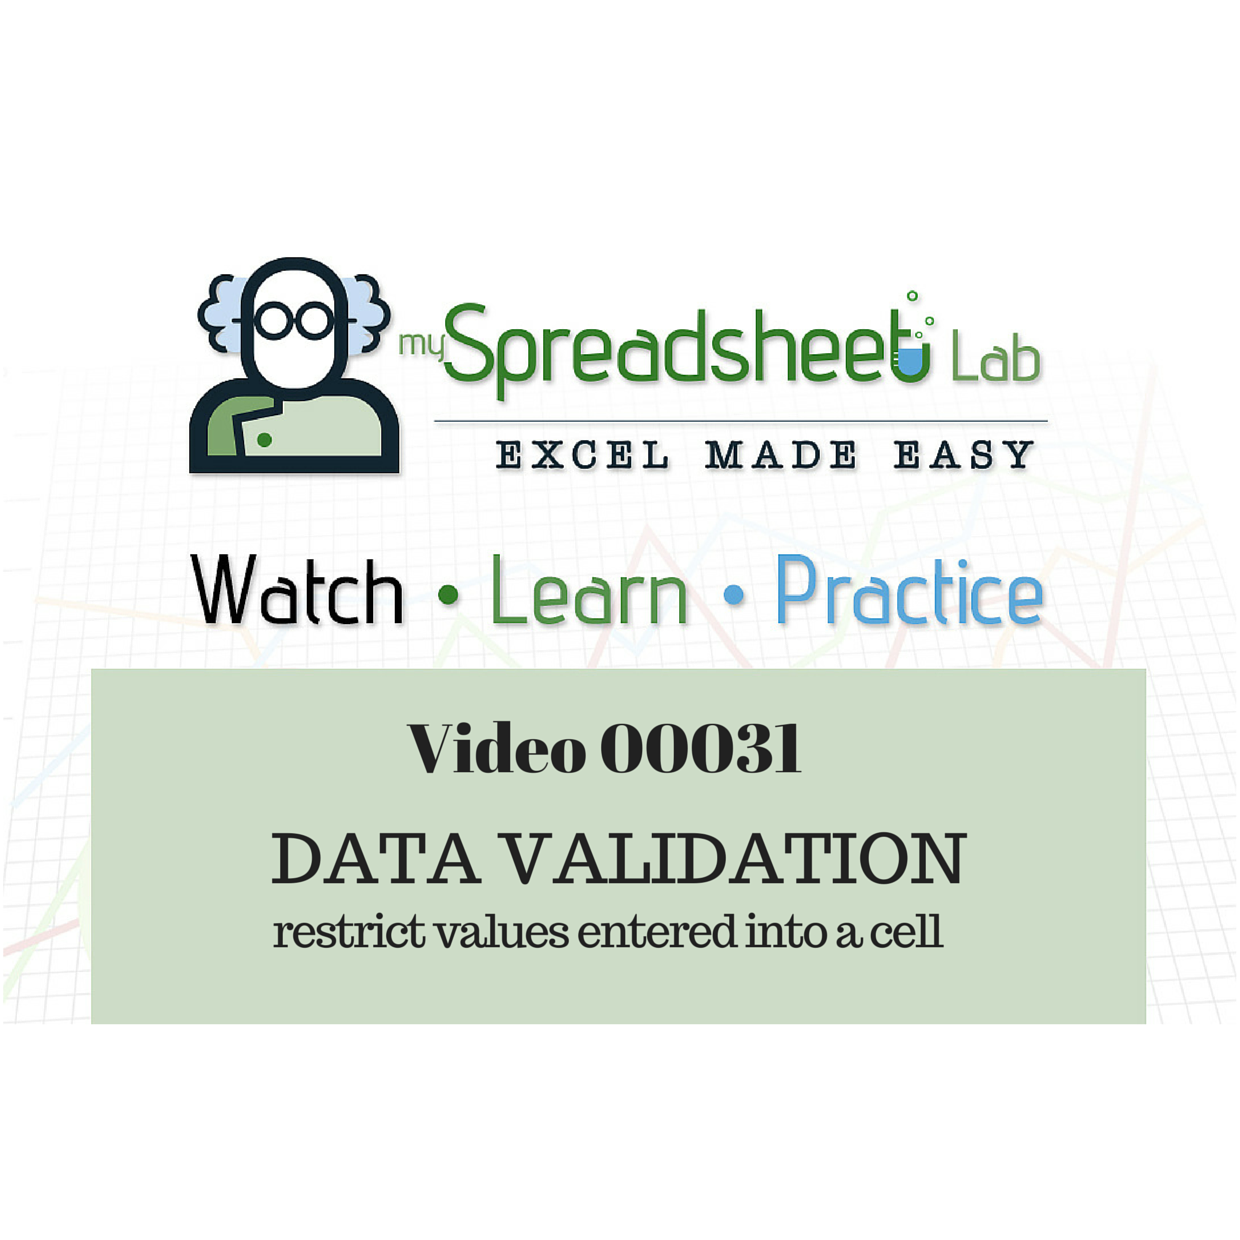 Video 00031 DATA VALIDATION restrict values entered into a cell